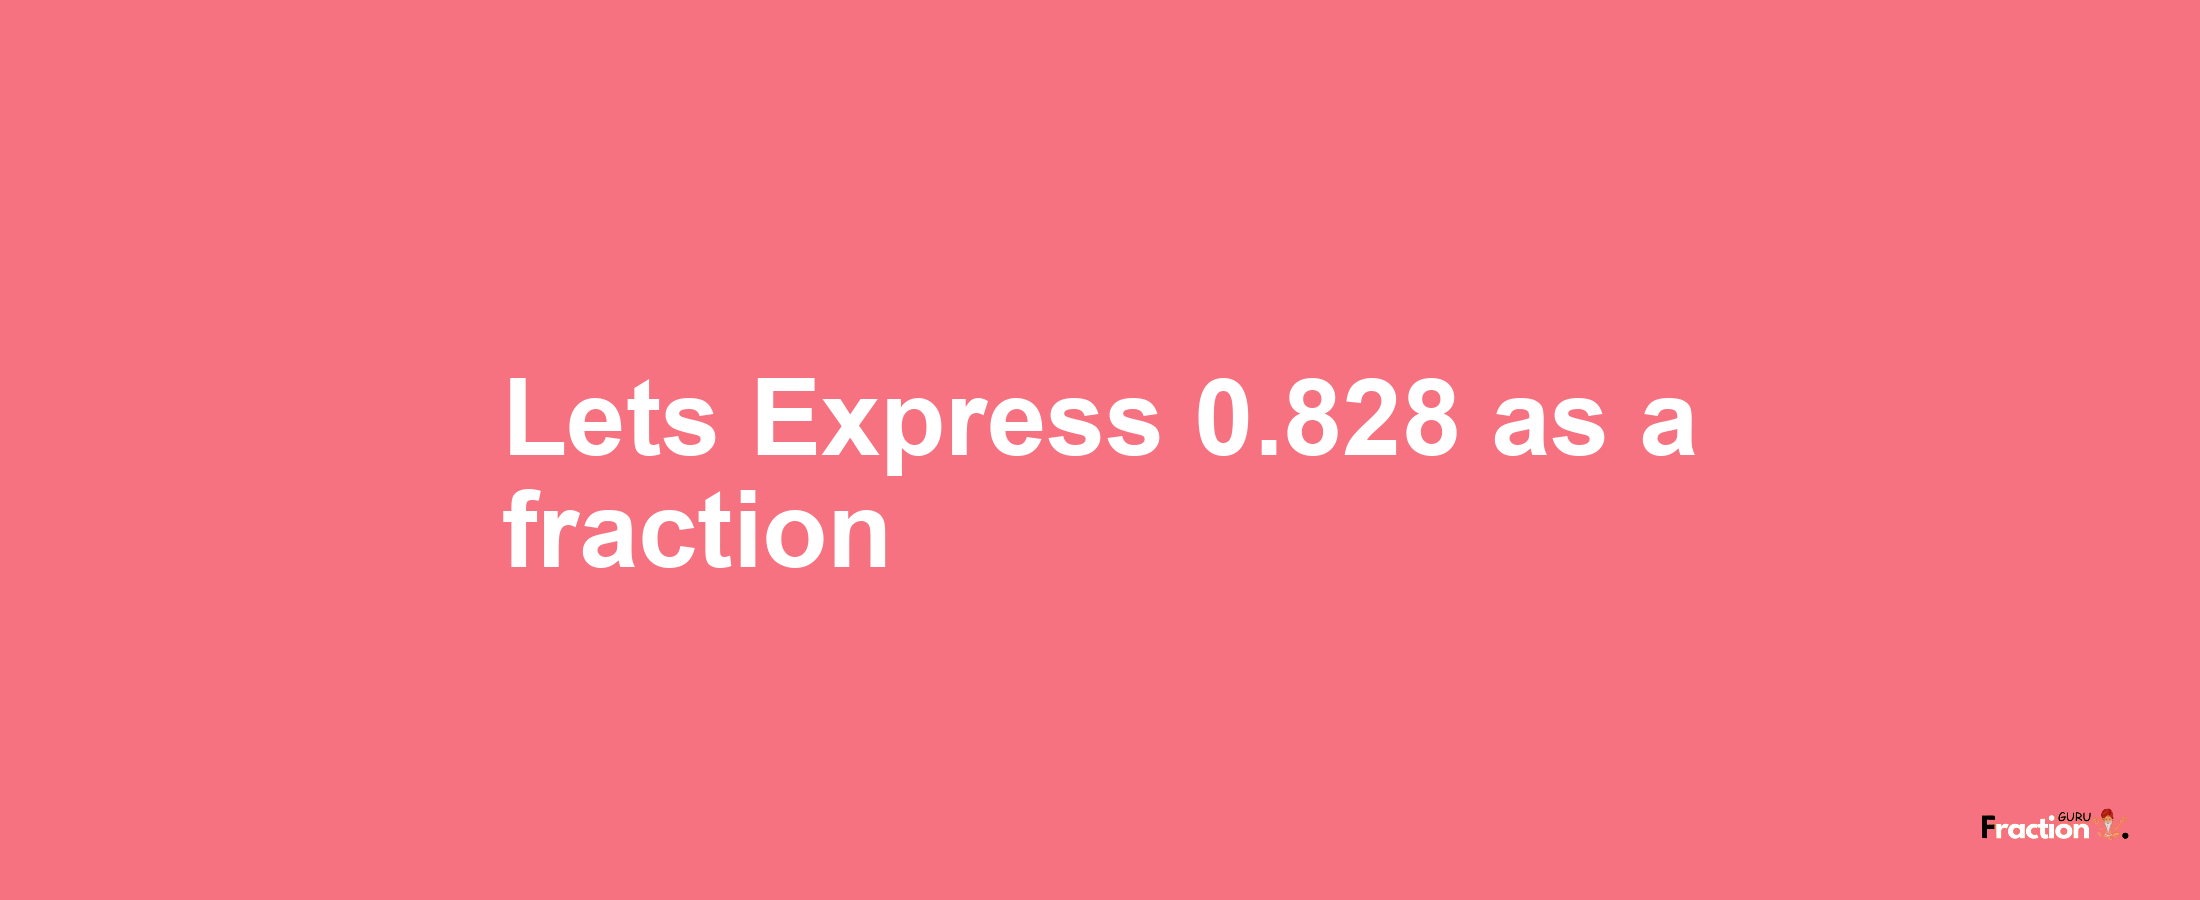 Lets Express 0.828 as afraction